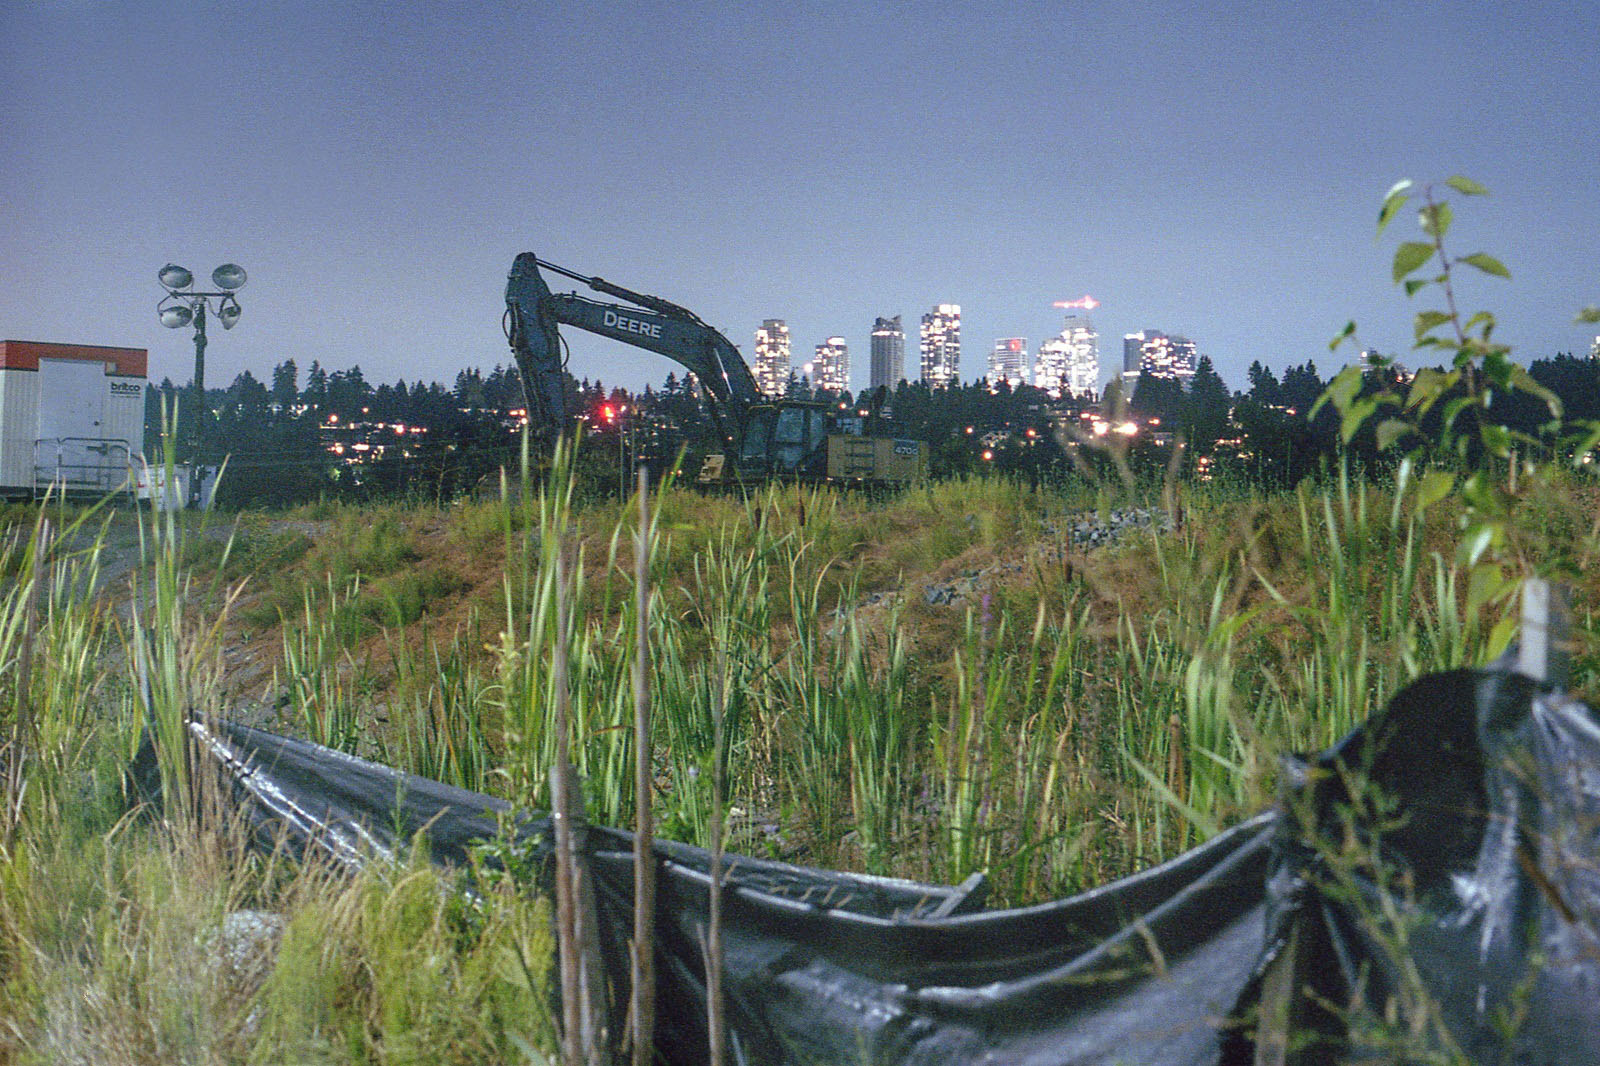 A pile of black debris sits in a tall grass field at night. An excavator is parked in the far centre of the frame. Behind it, a hill with trees is lit with residential lights and a row of highrise buildings in the distance. The sky is dark blue.